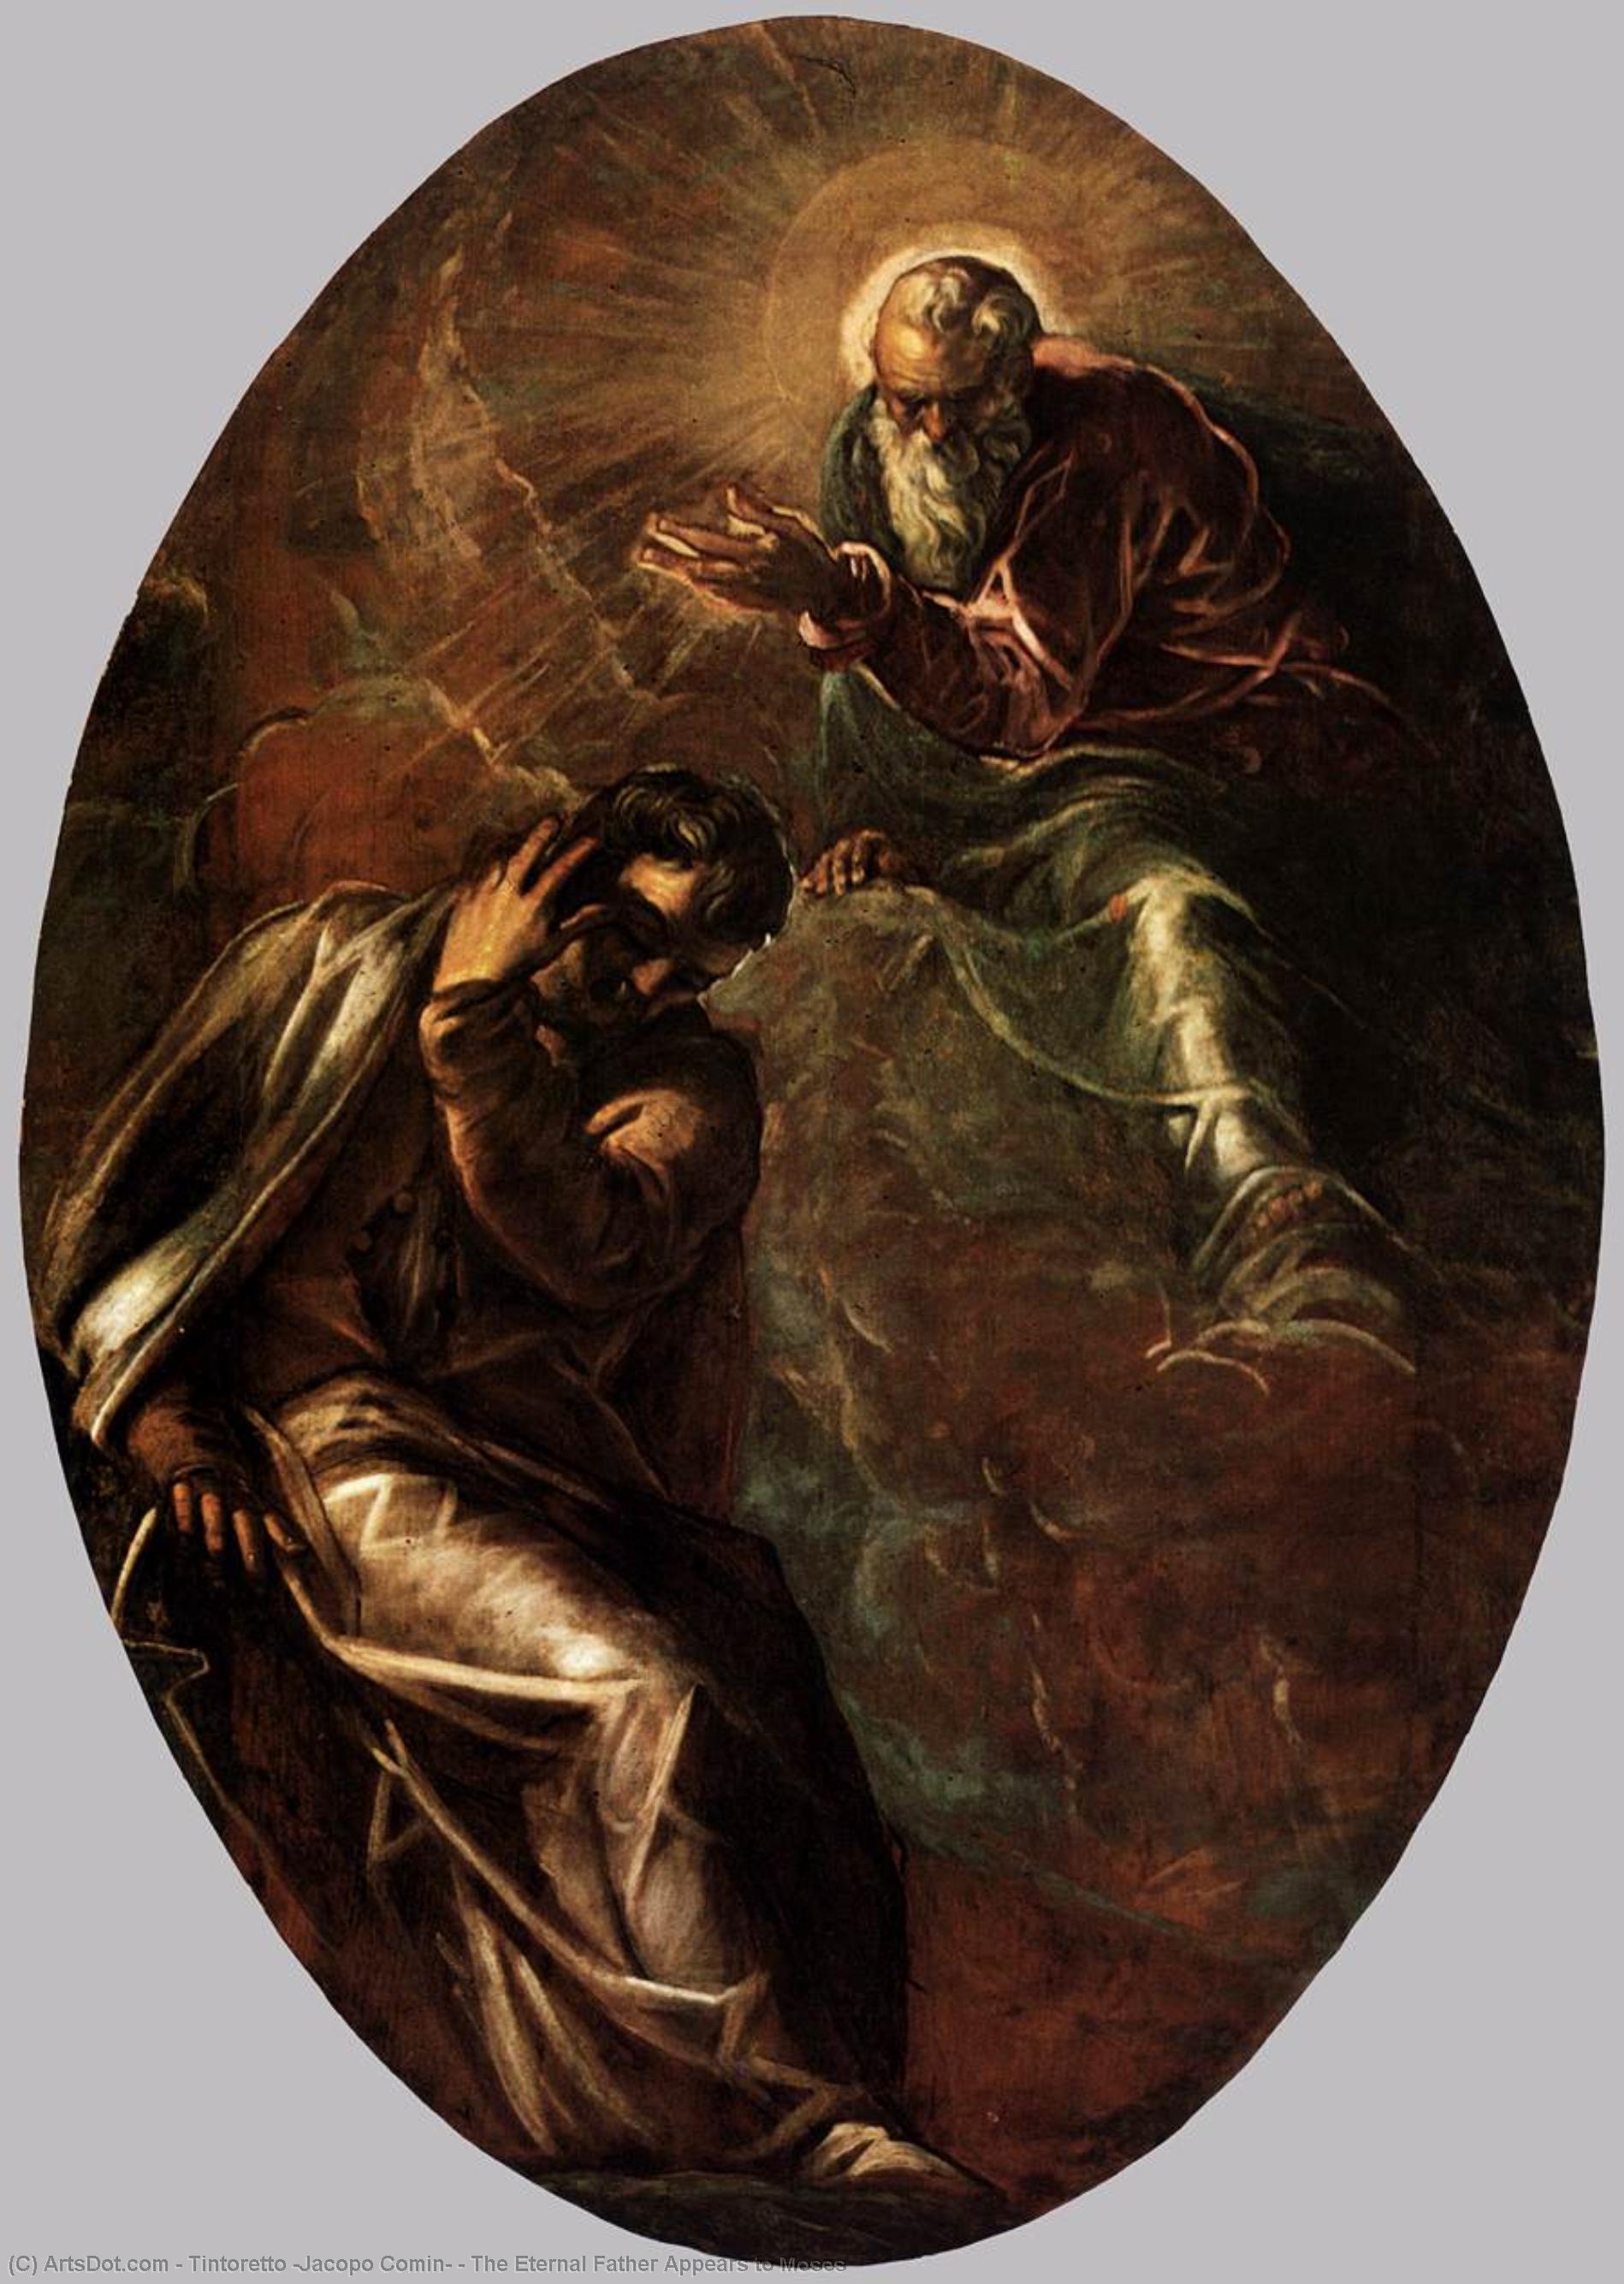 WikiOO.org - Encyclopedia of Fine Arts - Maalaus, taideteos Tintoretto (Jacopo Comin) - The Eternal Father Appears to Moses